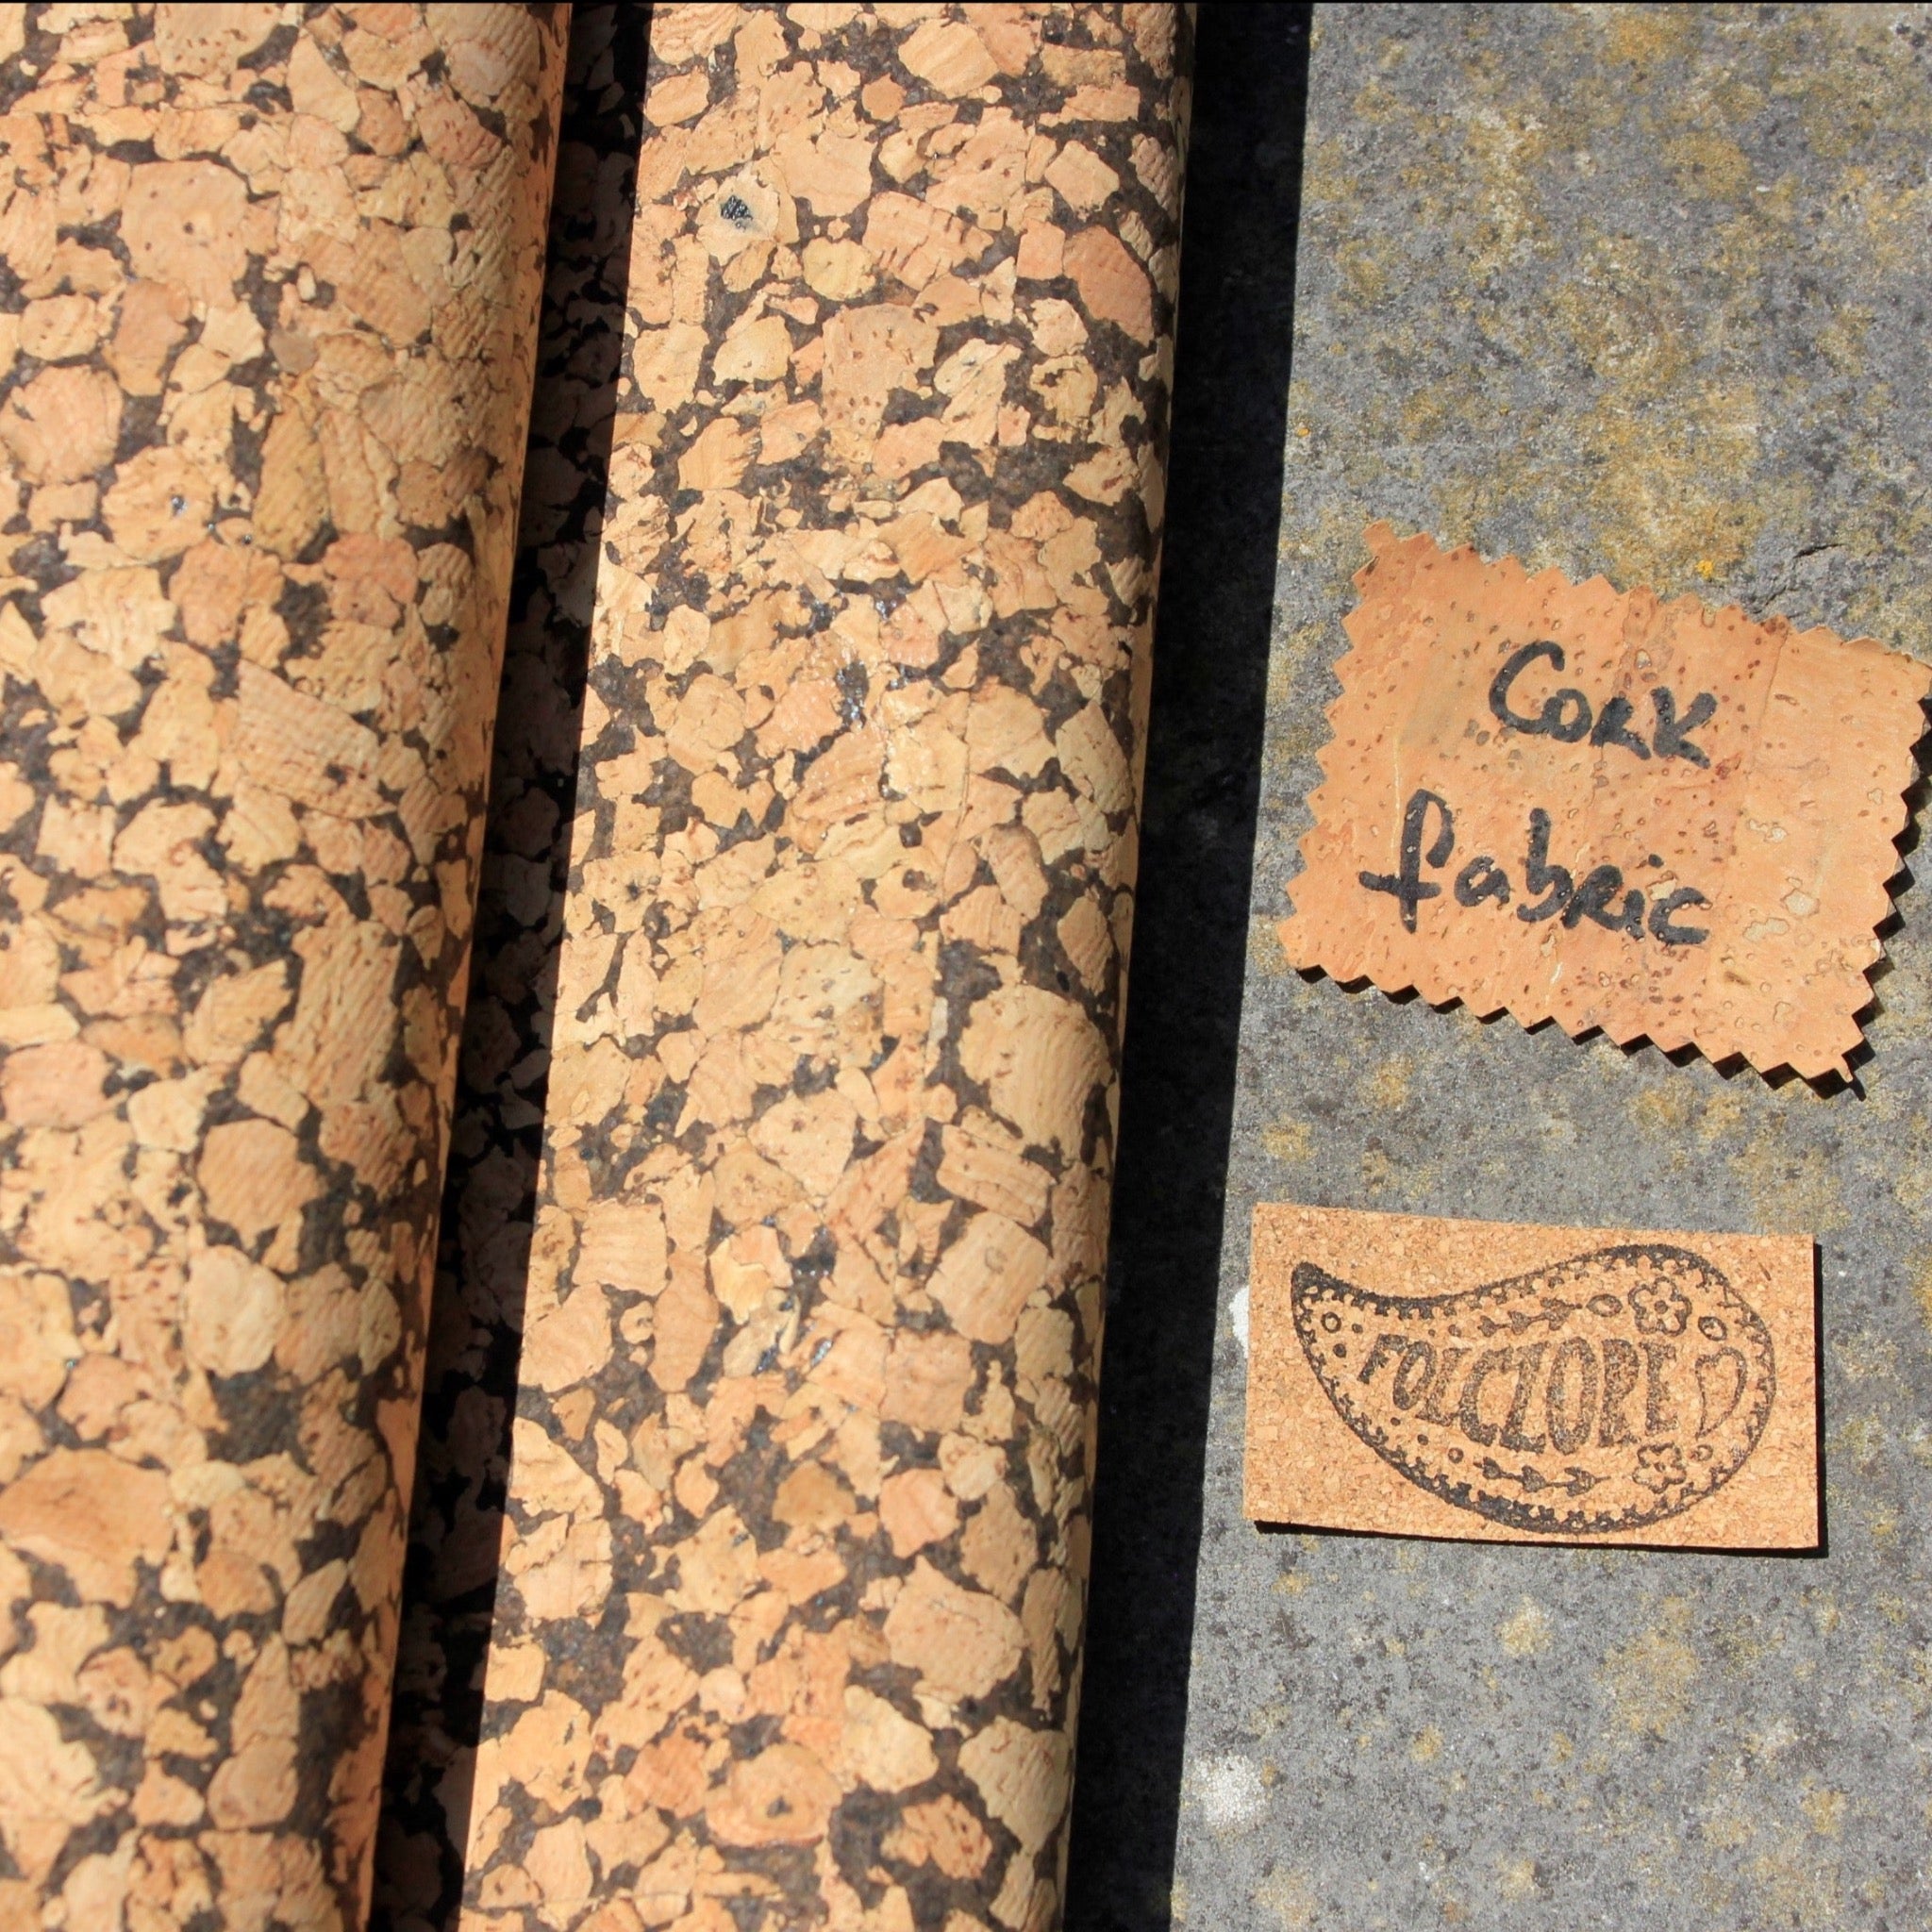 Cork fabric with light granite natural pattern